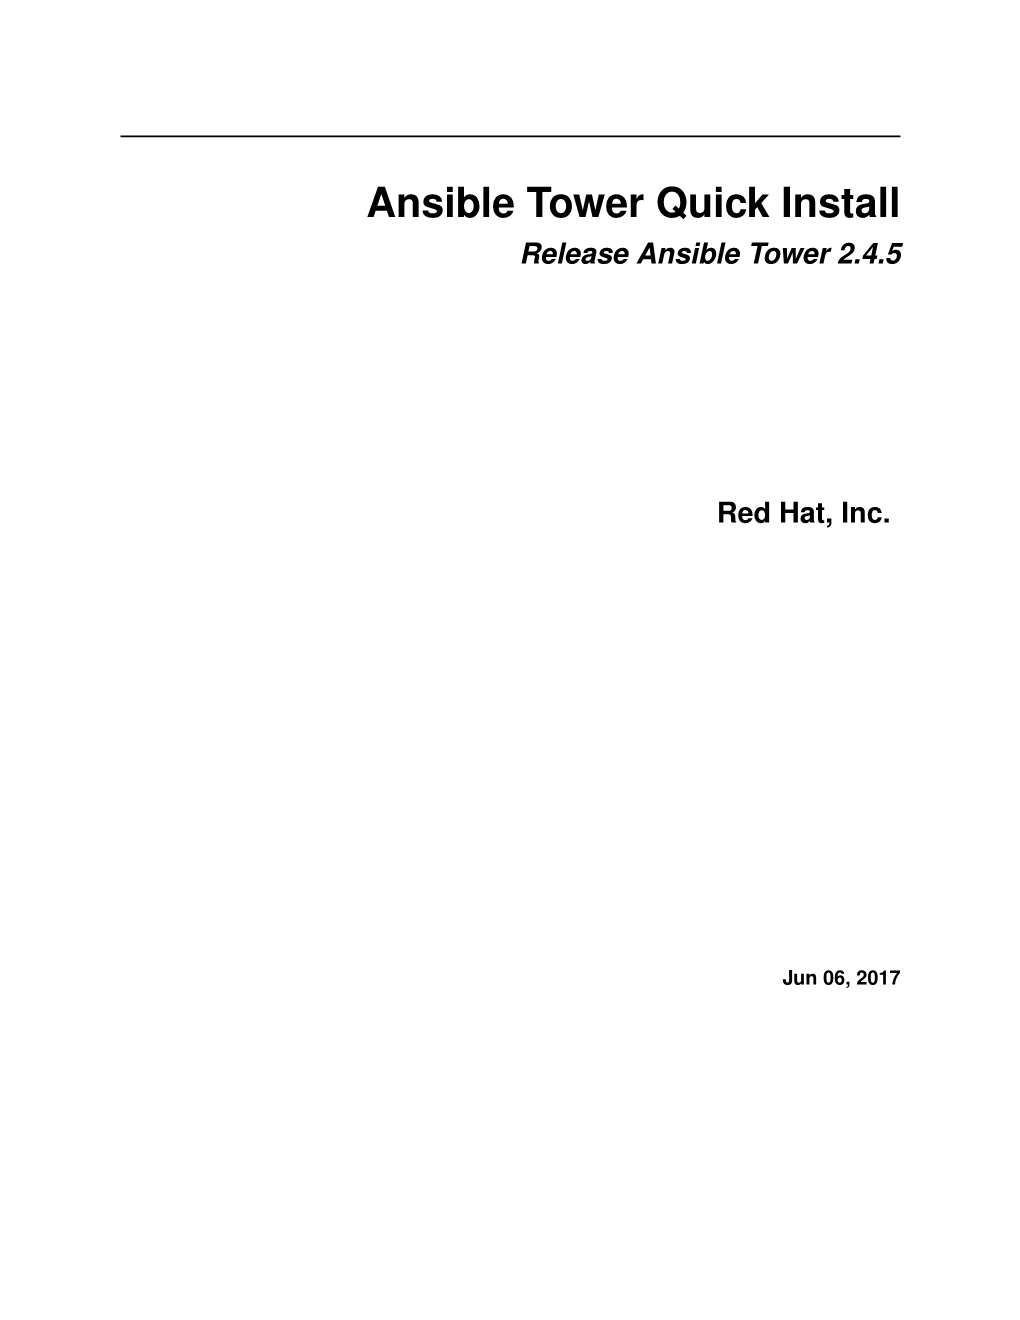 Ansible Tower Quick Install Release Ansible Tower 2.4.5